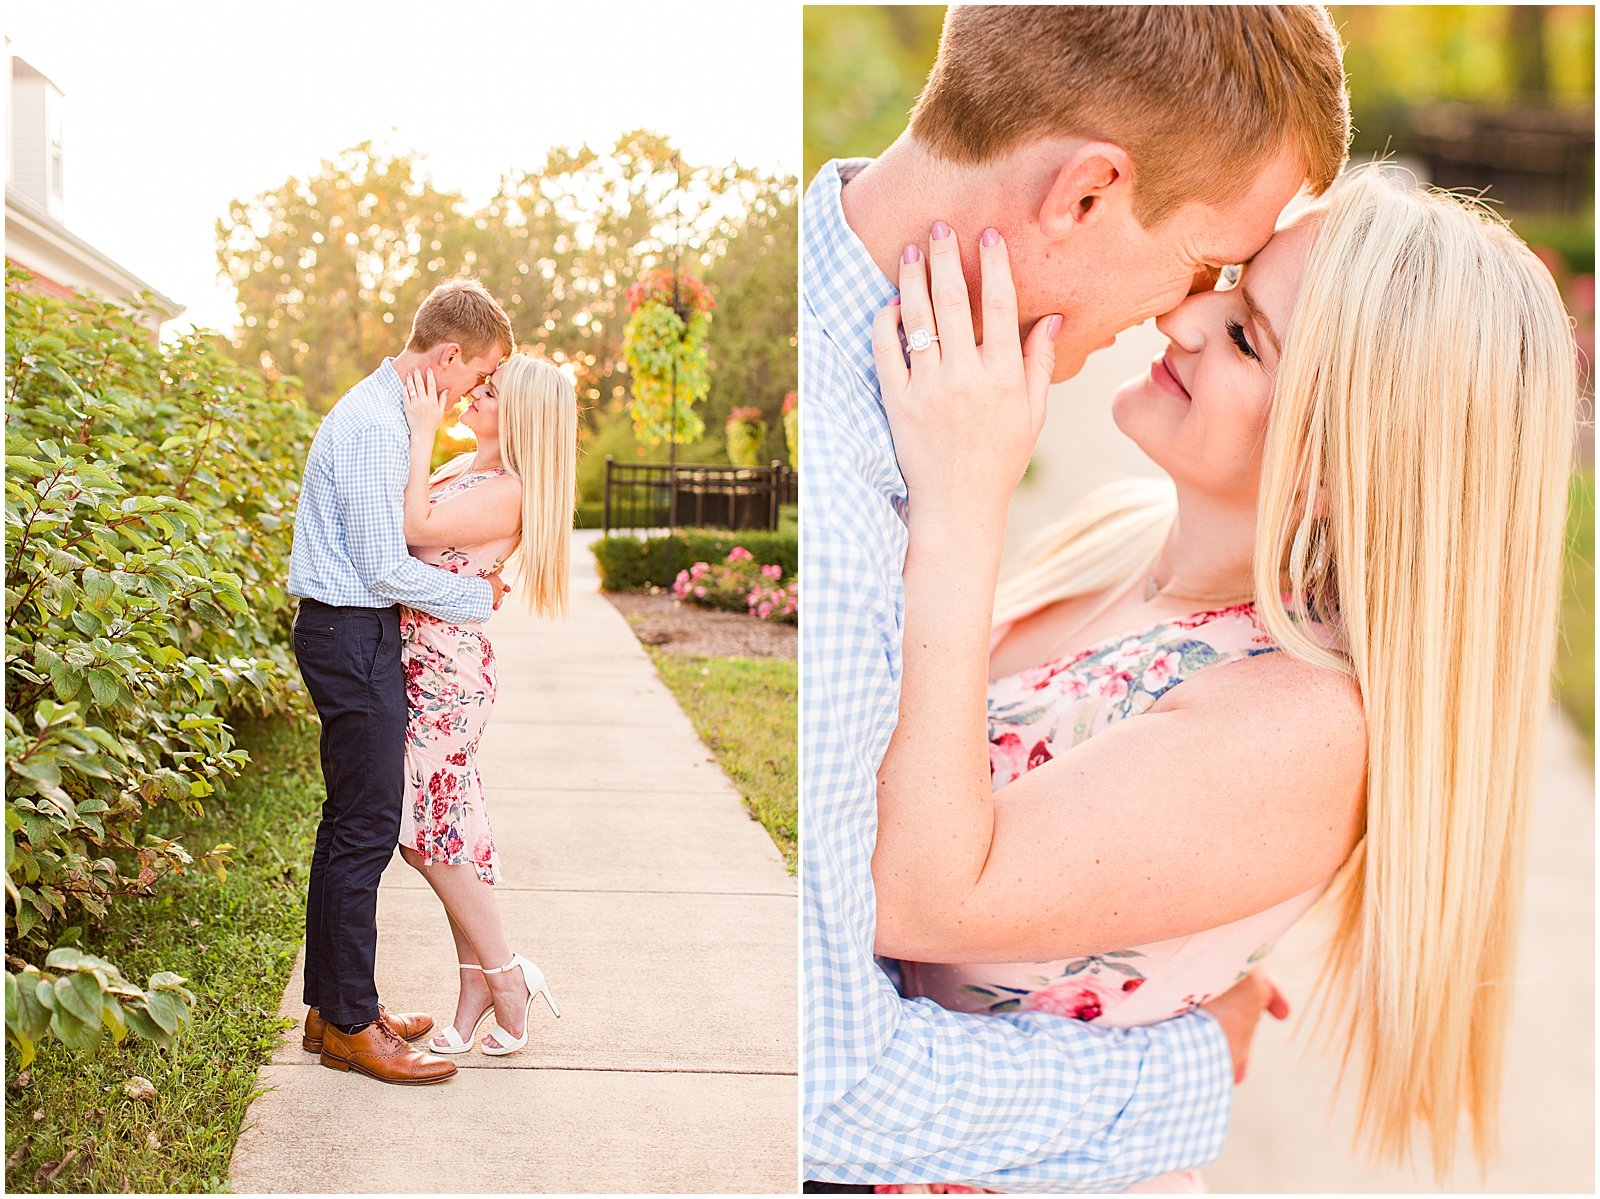 A Cute and Cuddly Engagement Session in Carmel, IN | Abbi and Josh0041.jpg